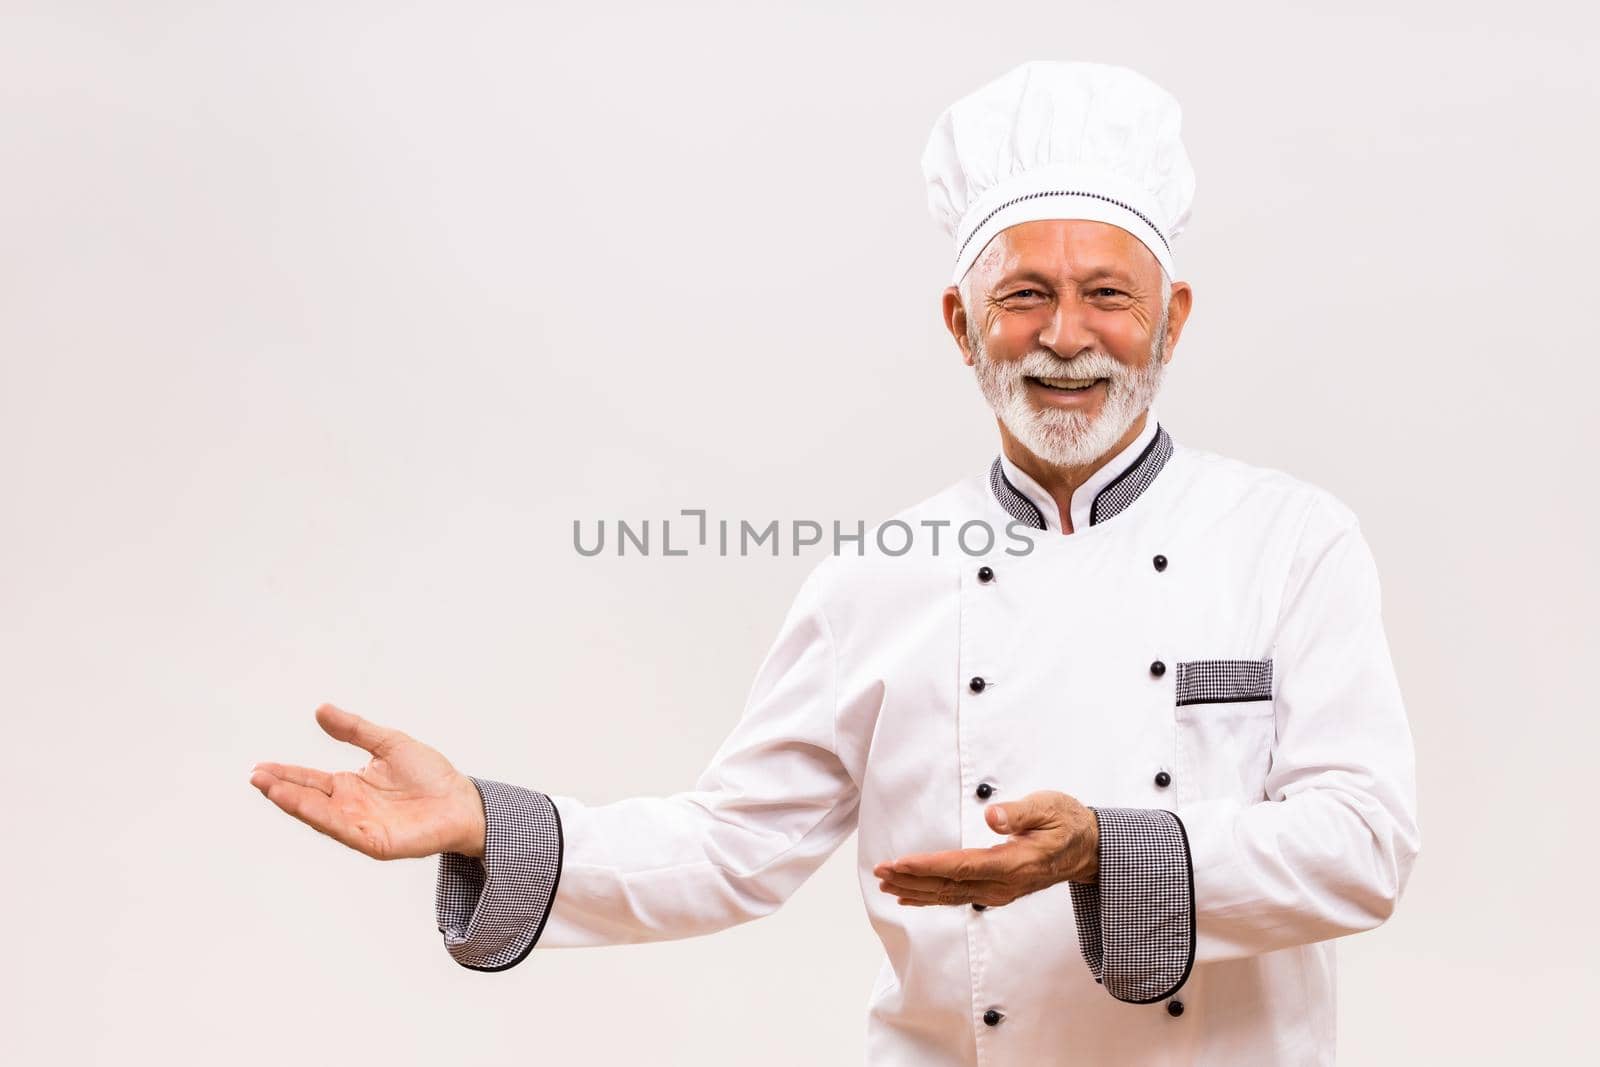 Portrait of senior chef showing welcome gesture.